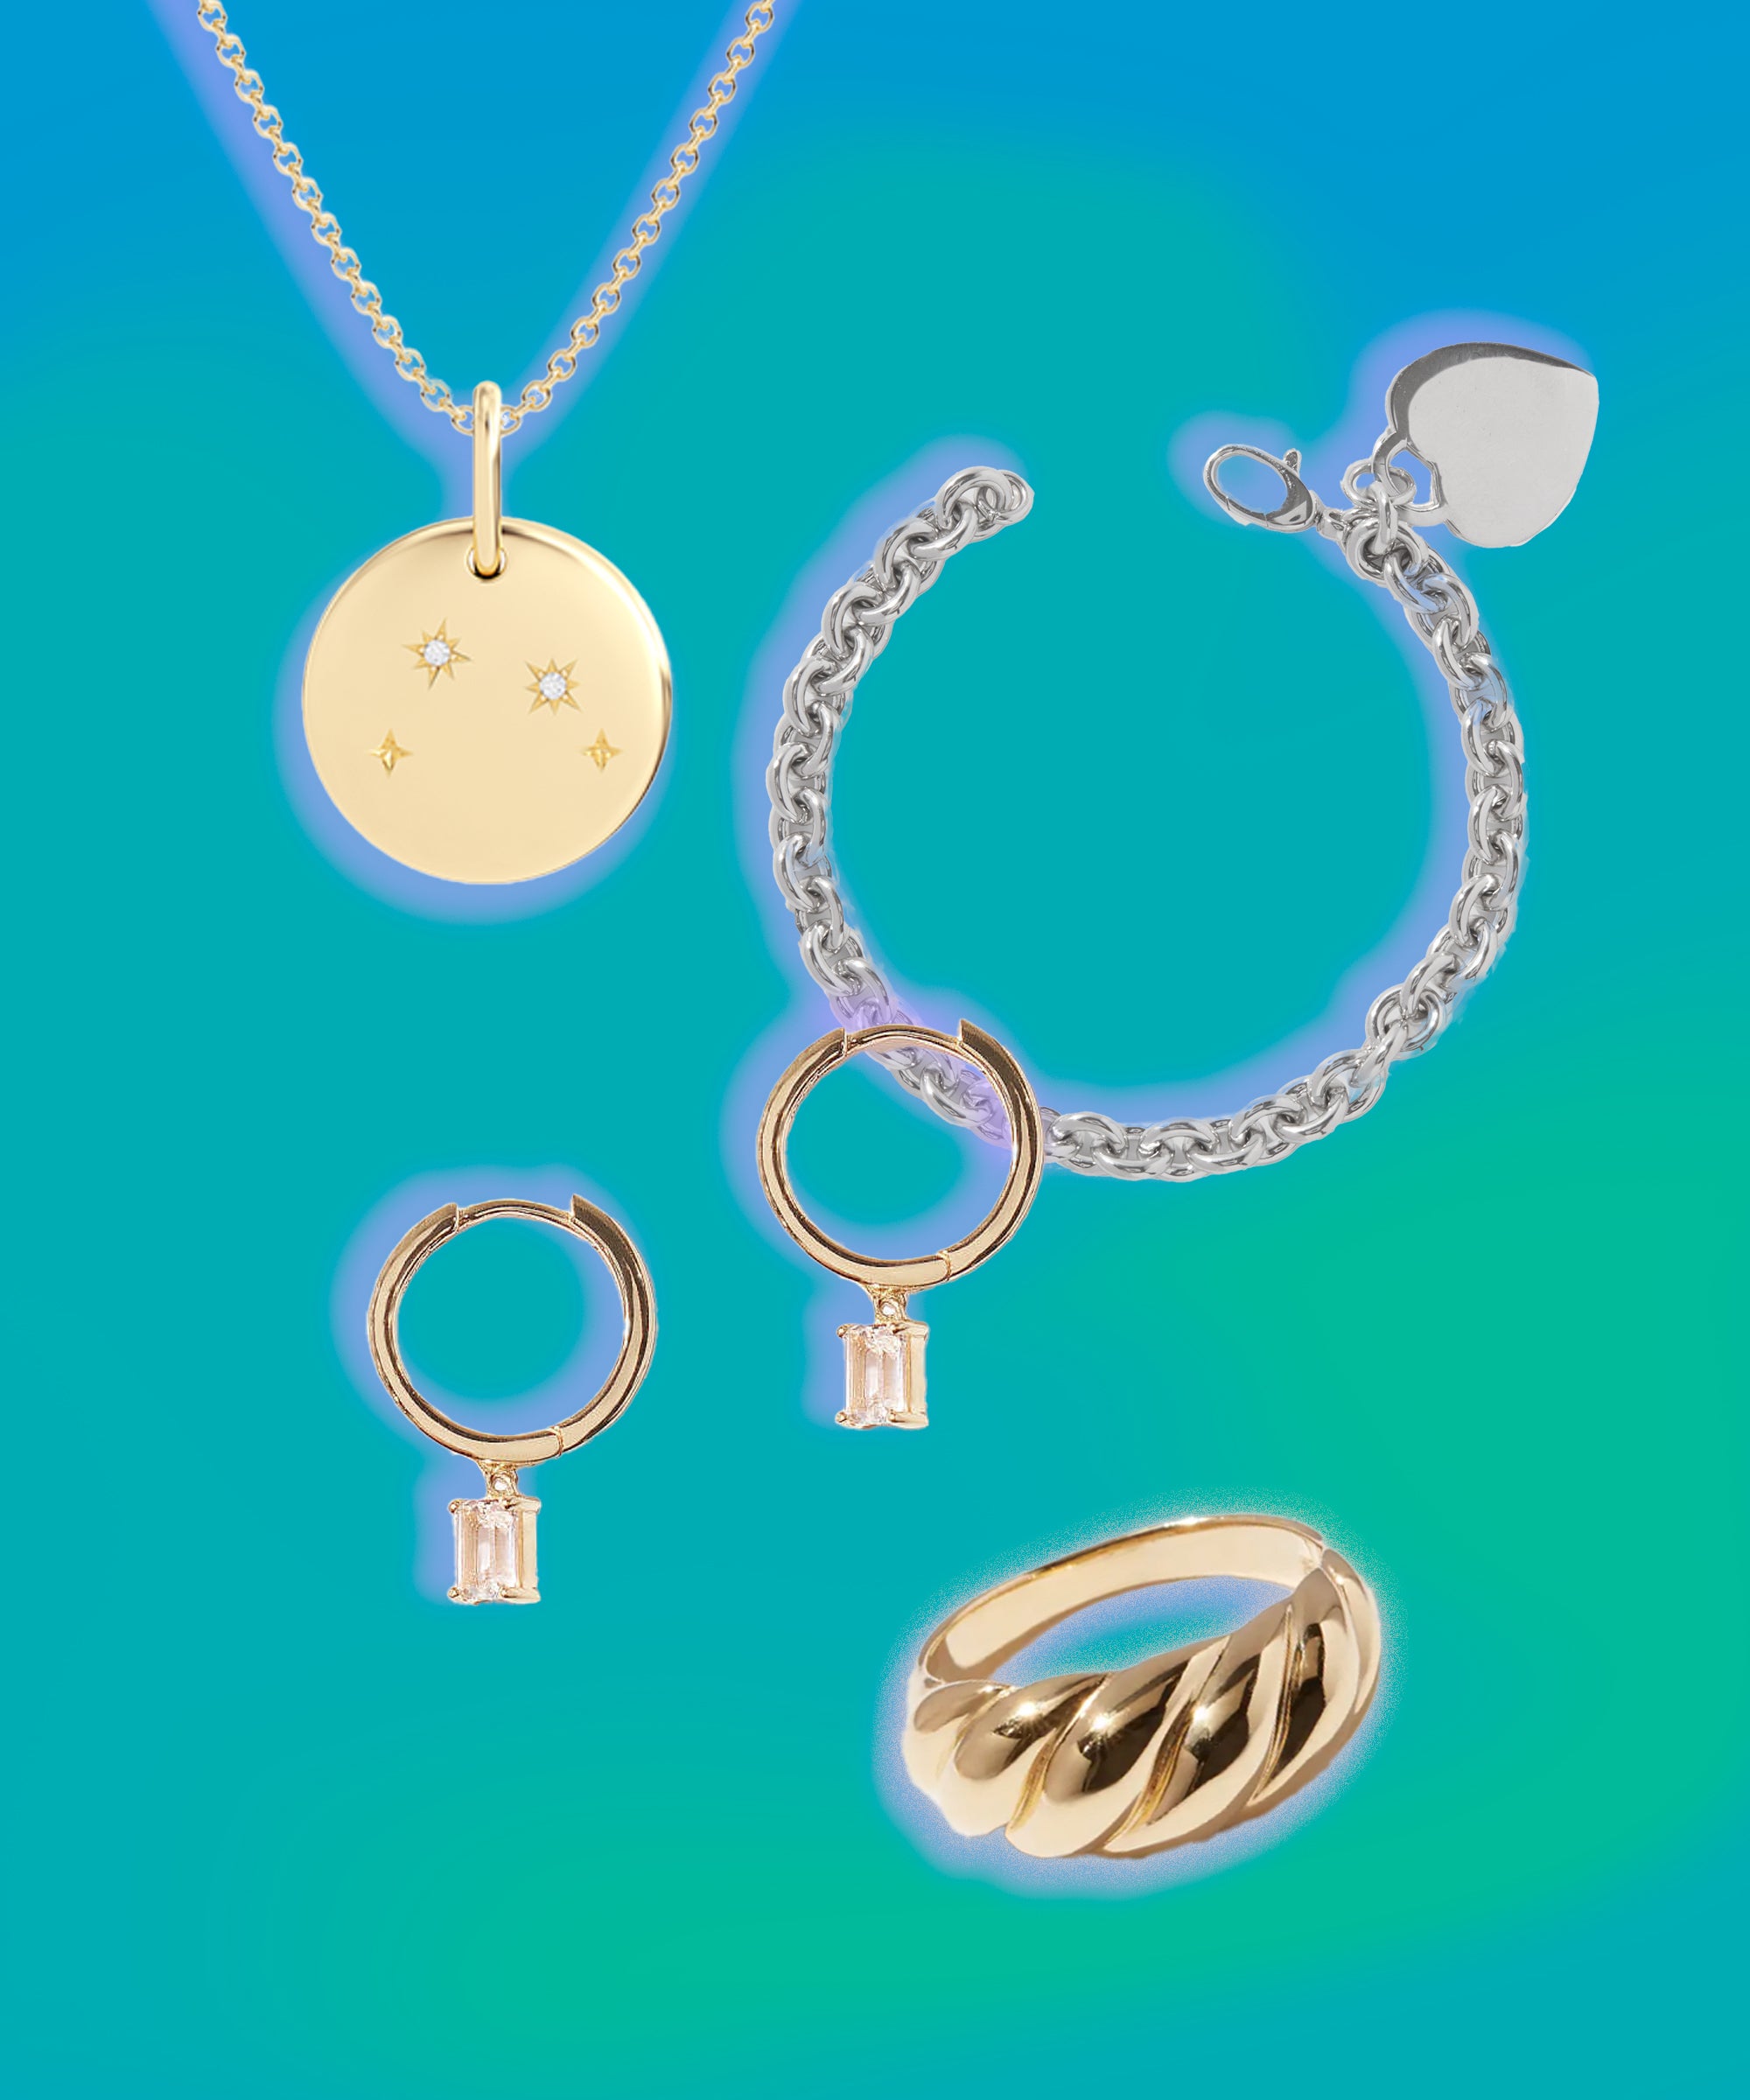 Quince Jewelry  Our Favorite Under-$100 Jewelry